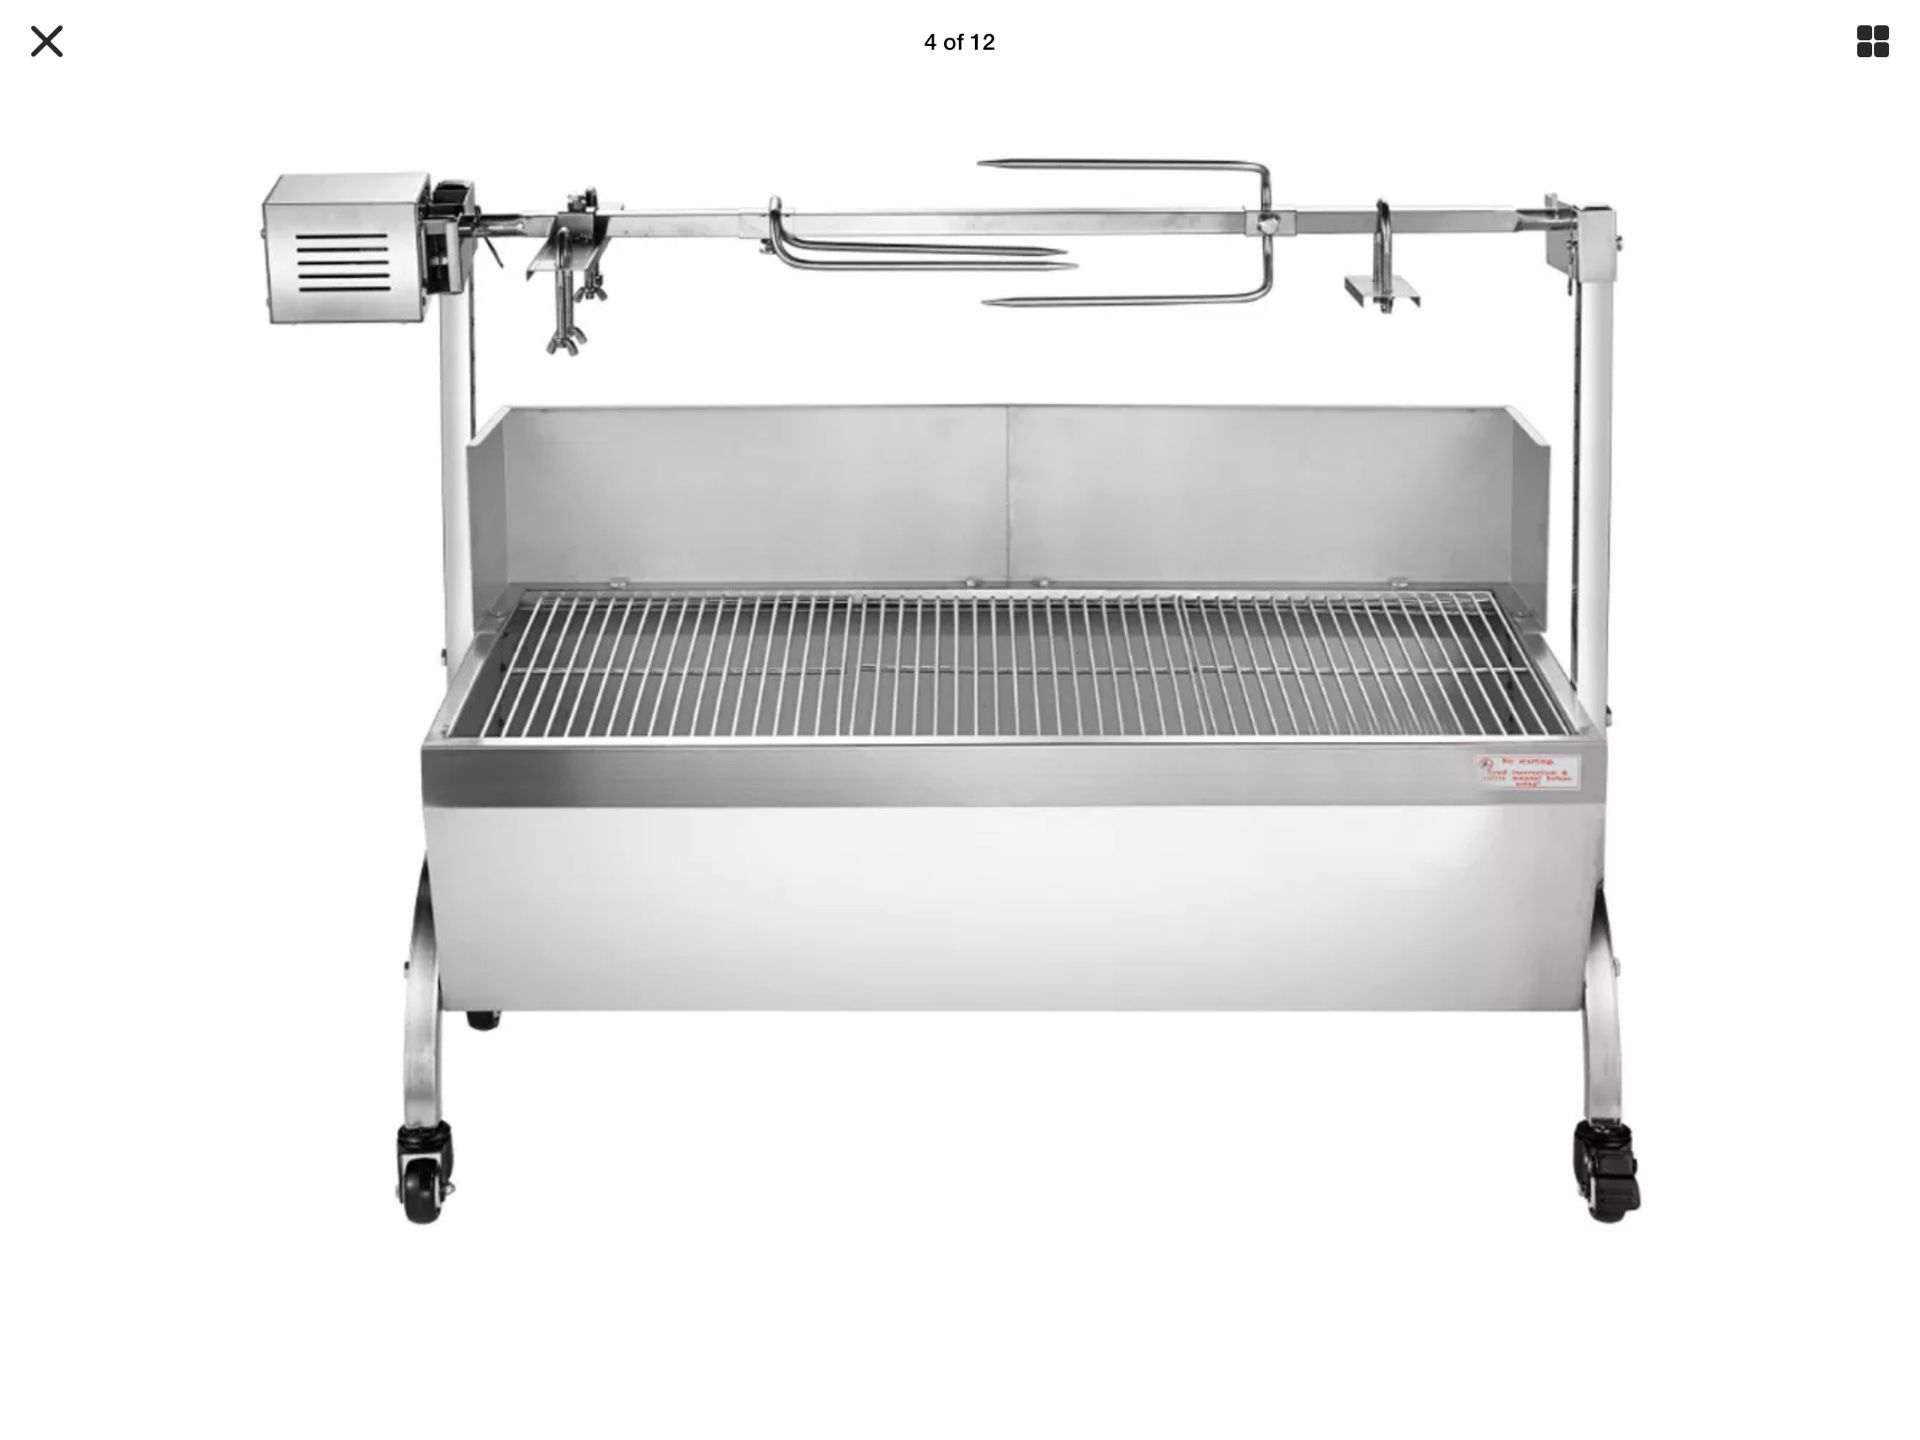 NEW STAINLESS STEEL SPIT BAR B QUE PIG LAMB ROASTER PIT ROTISSERIE NEW FULLY ASSEMBLED!!!!!